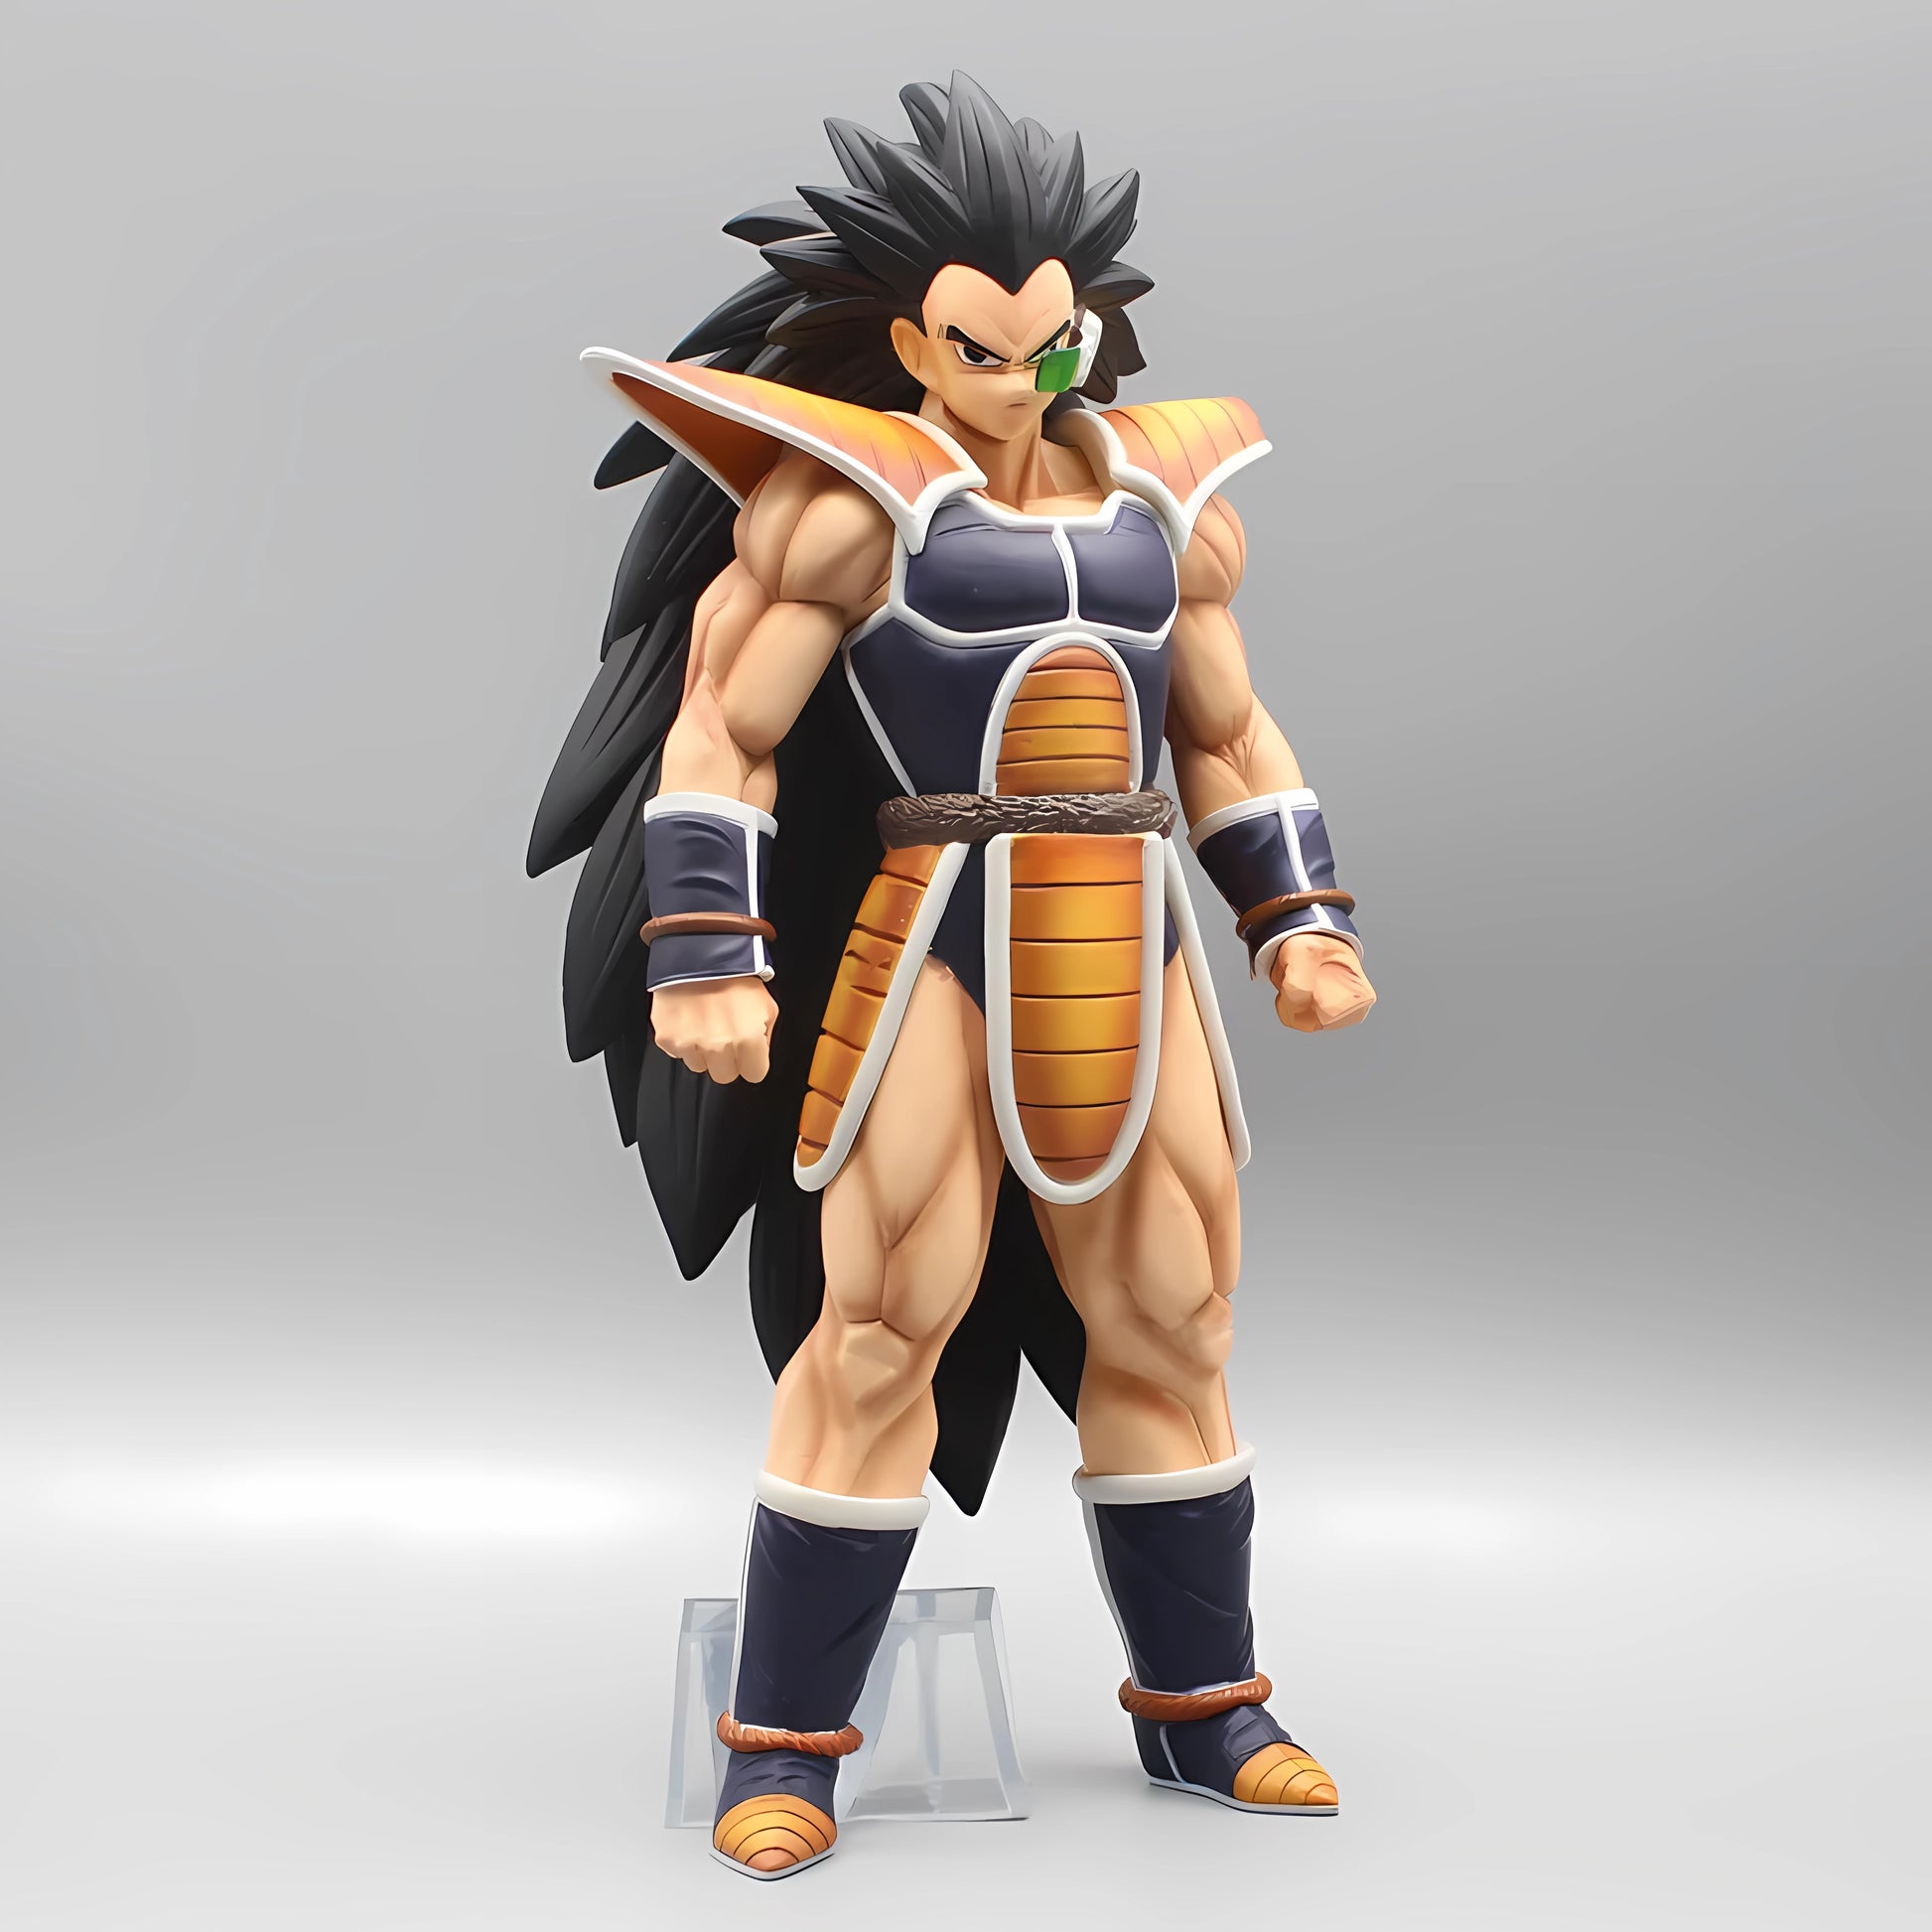 Dragon Ball figure of Raditz standing confidently with arms at his sides, featuring his long spiky black hair and Saiyan armor, on a clear stand against a grey background.